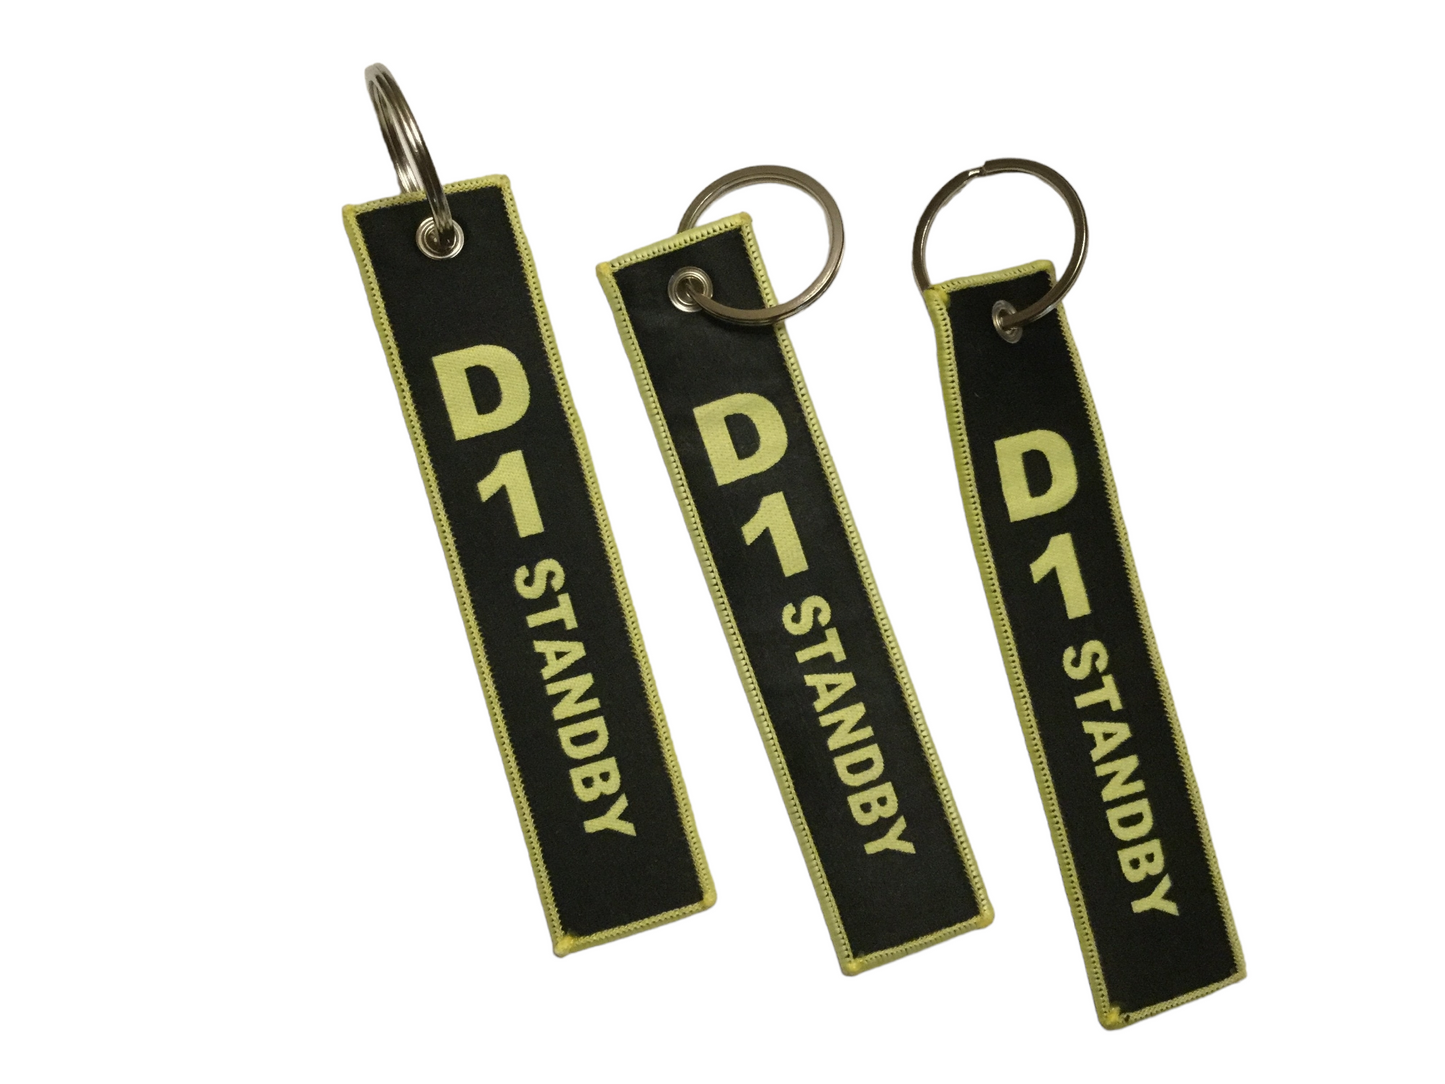 D1 Stand-by Luggage Tag